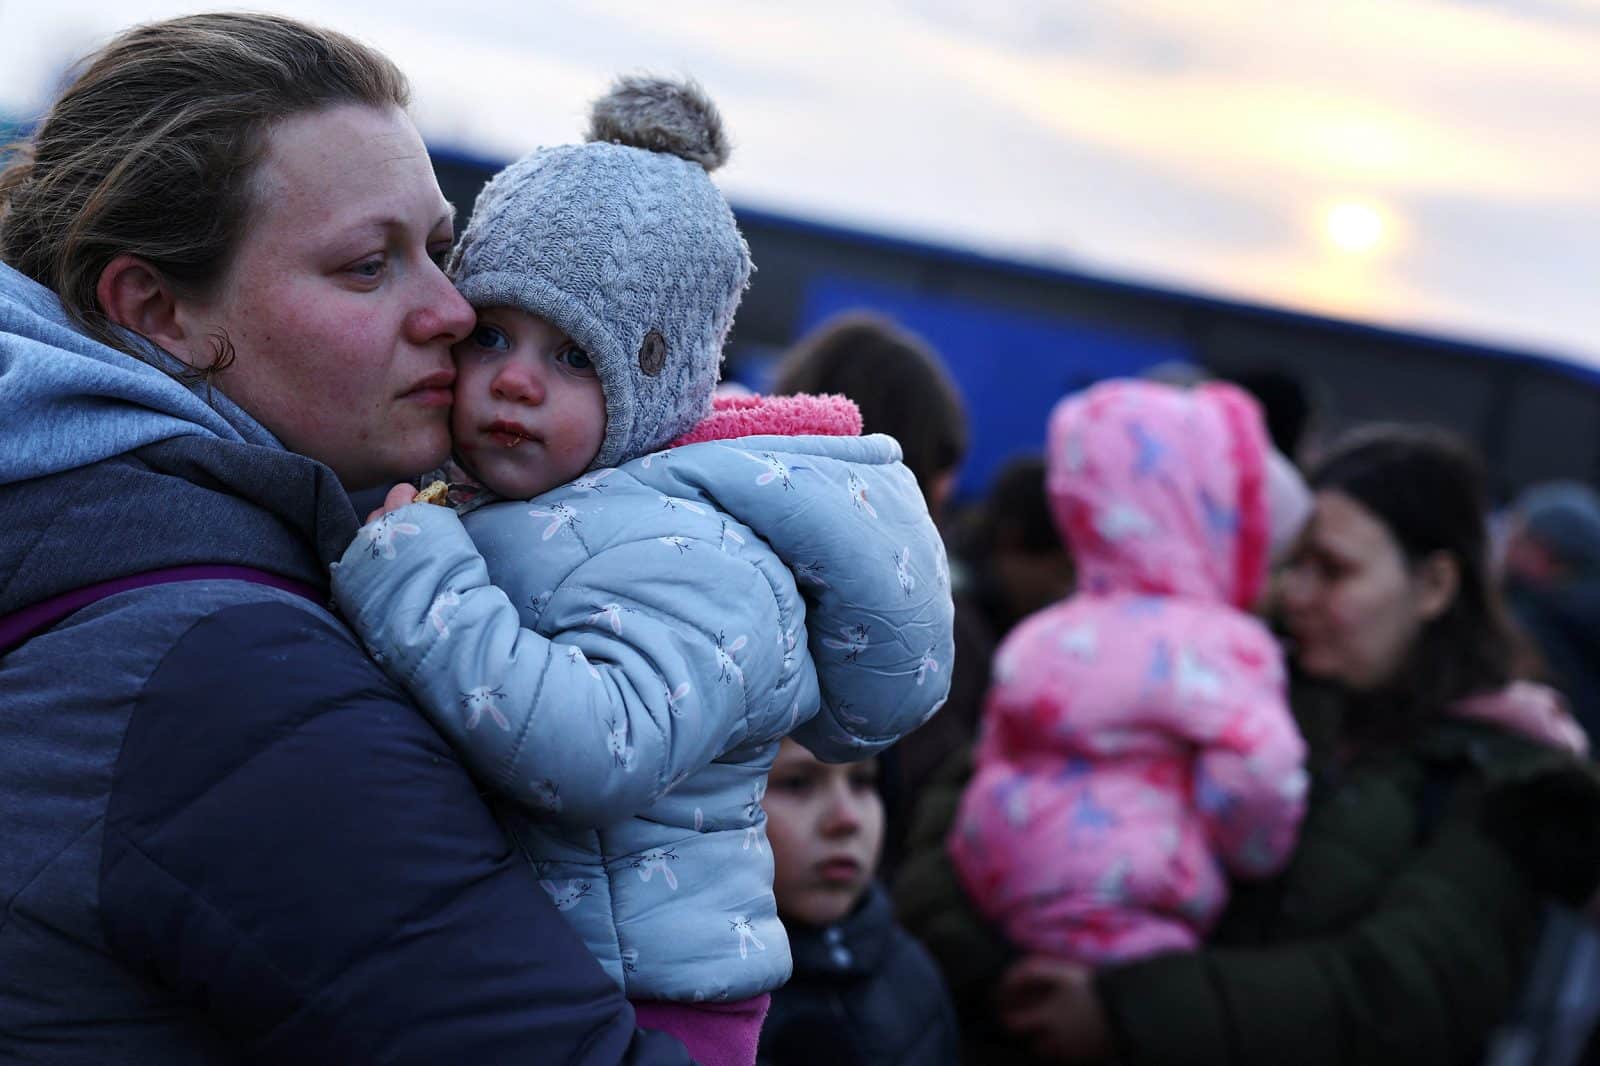 Woman refugees from Ukraine are at increased risk of violence, – US Ambassador to the UN